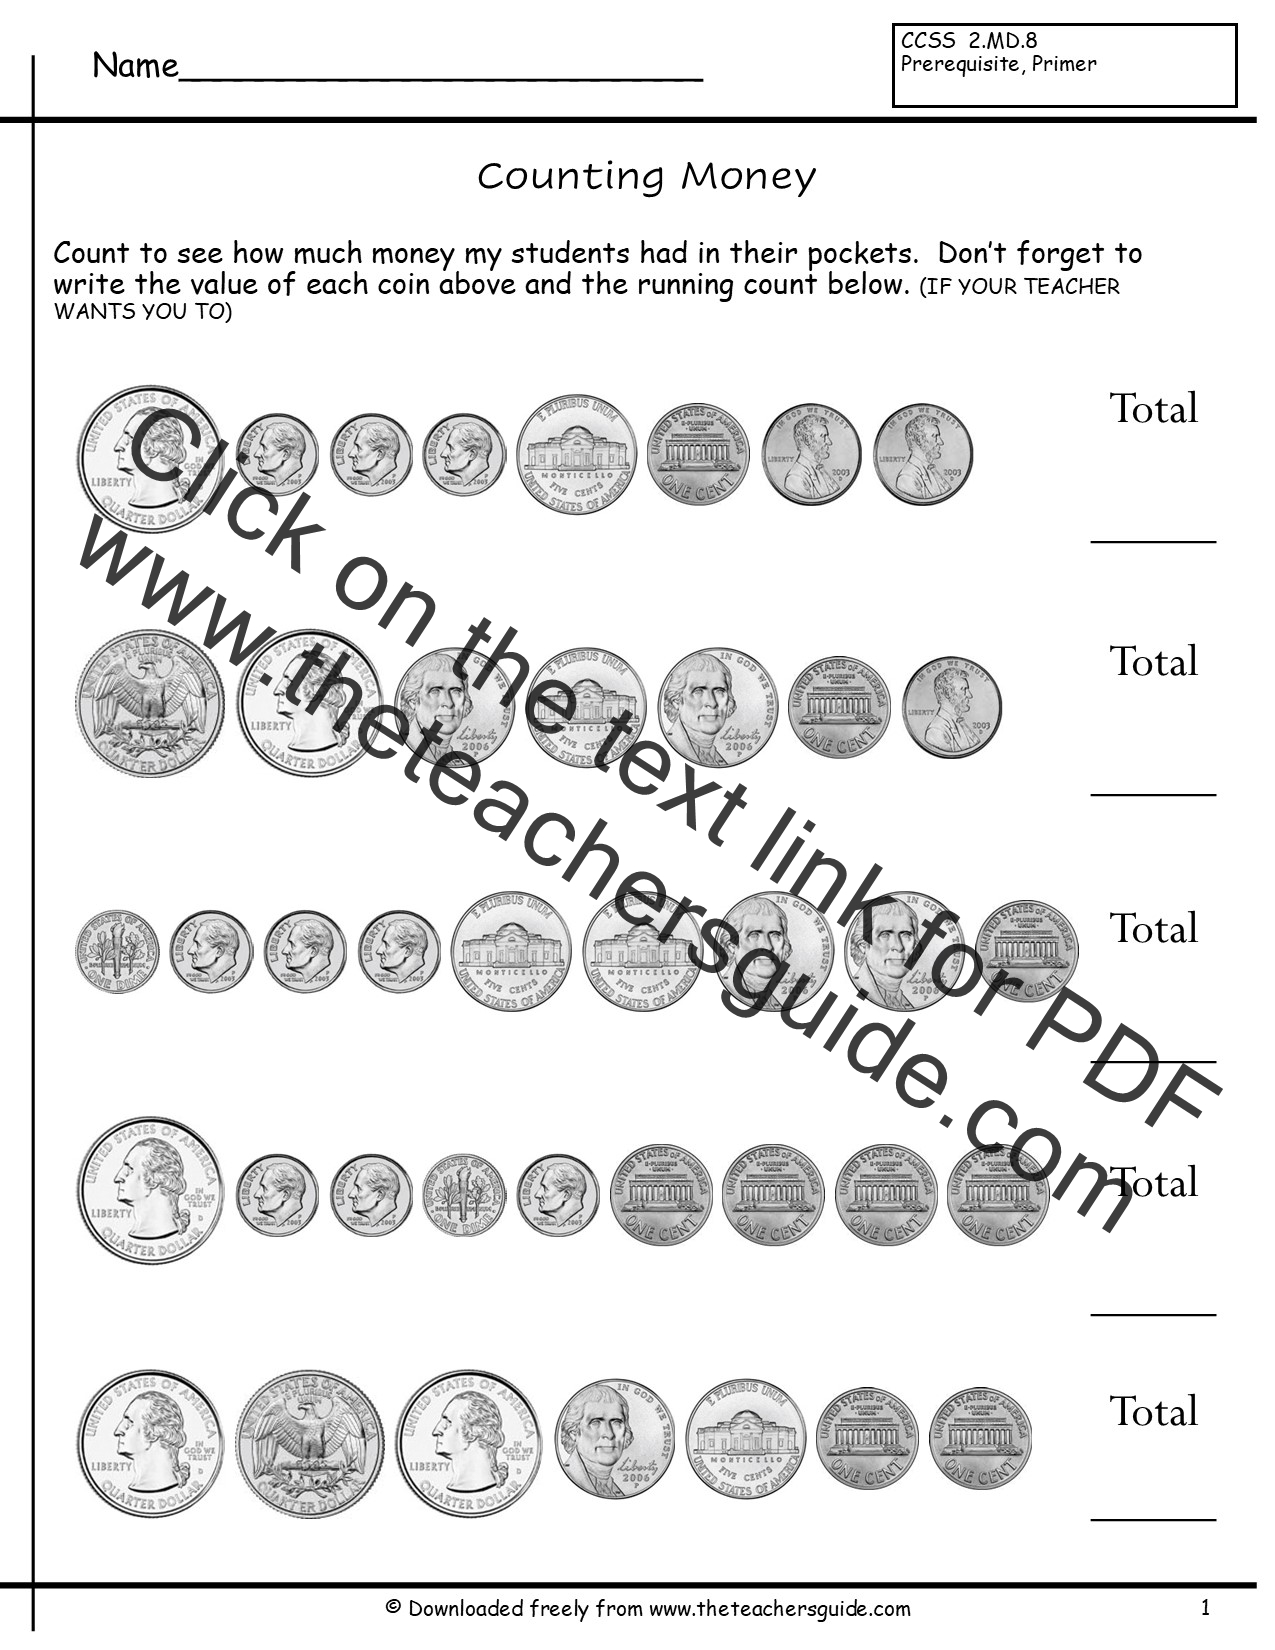 counting-coins-worksheets-from-the-teacher-s-guide